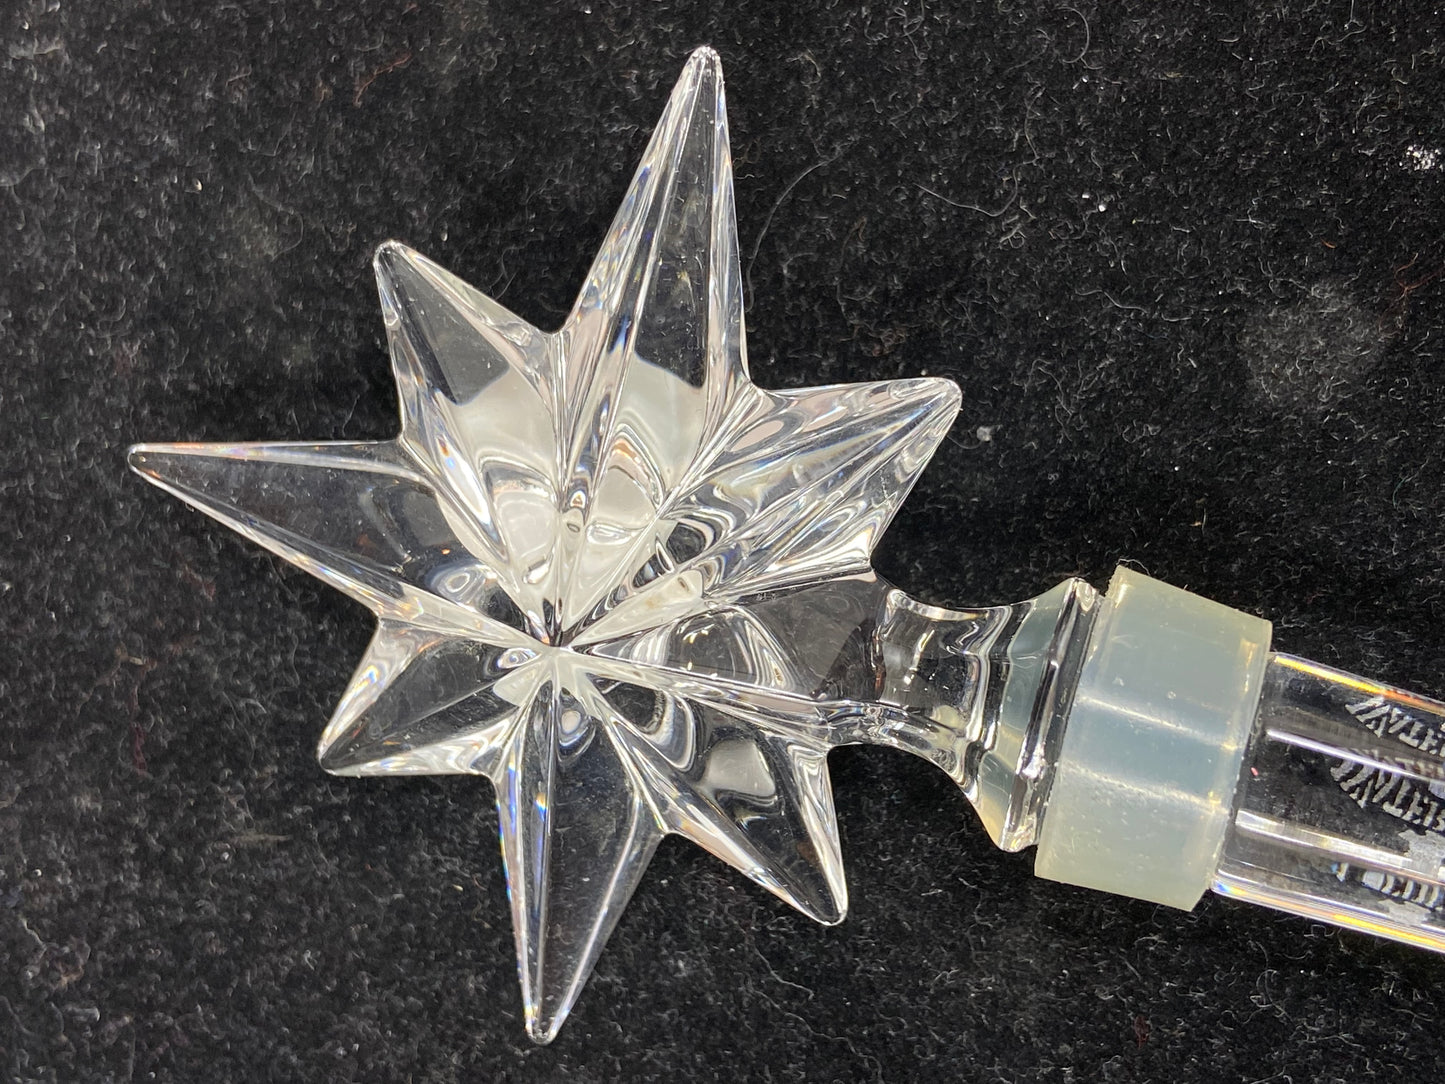 Pair of Waterford Crystal Star Bottle Stoppers (26509, 26510)